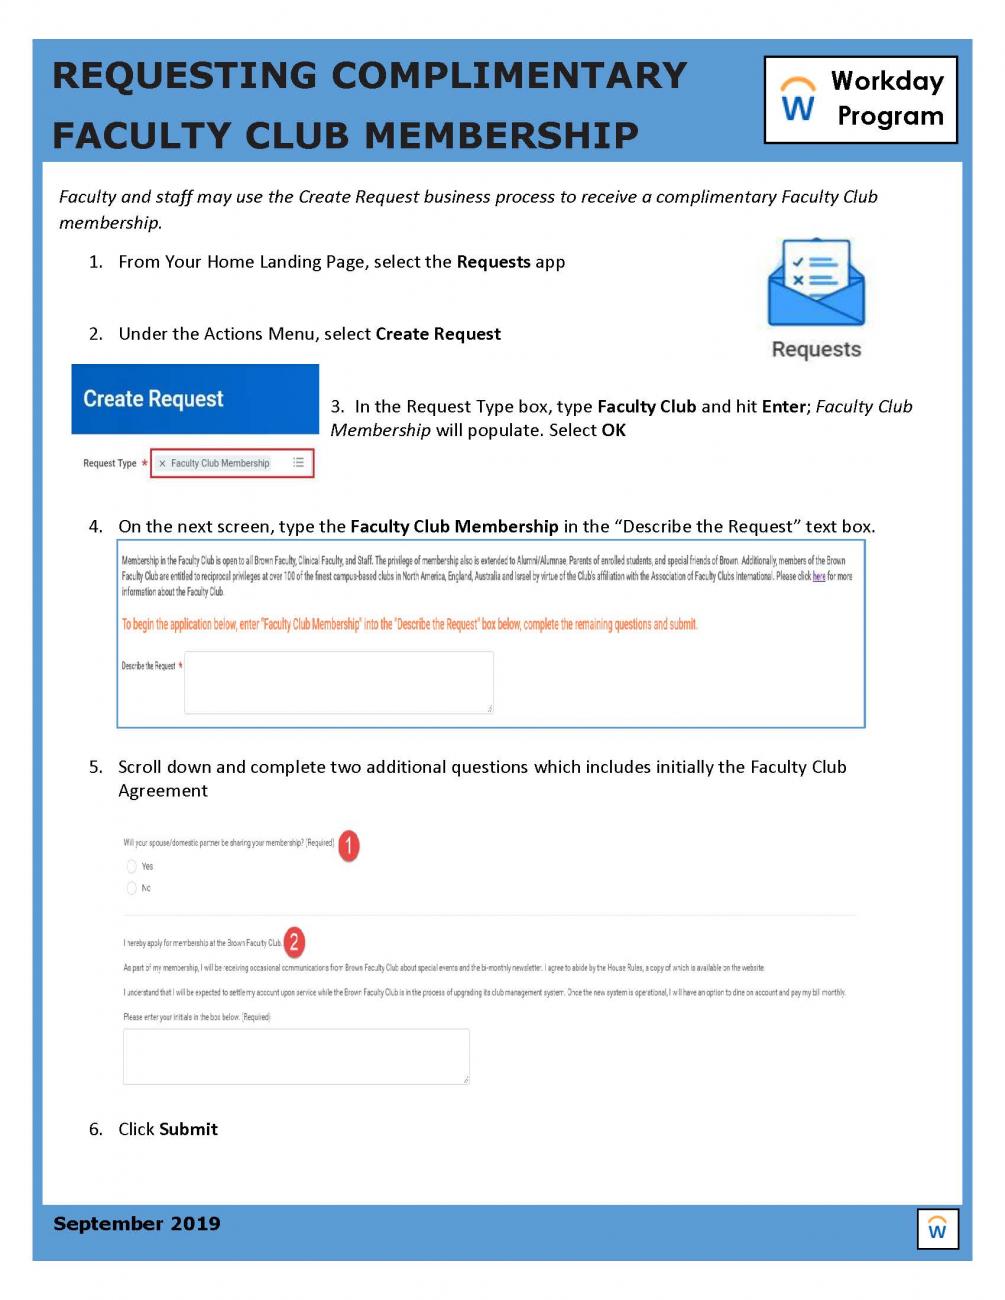 Faculty Club Application for Membership using Workday (1) (1).jpg